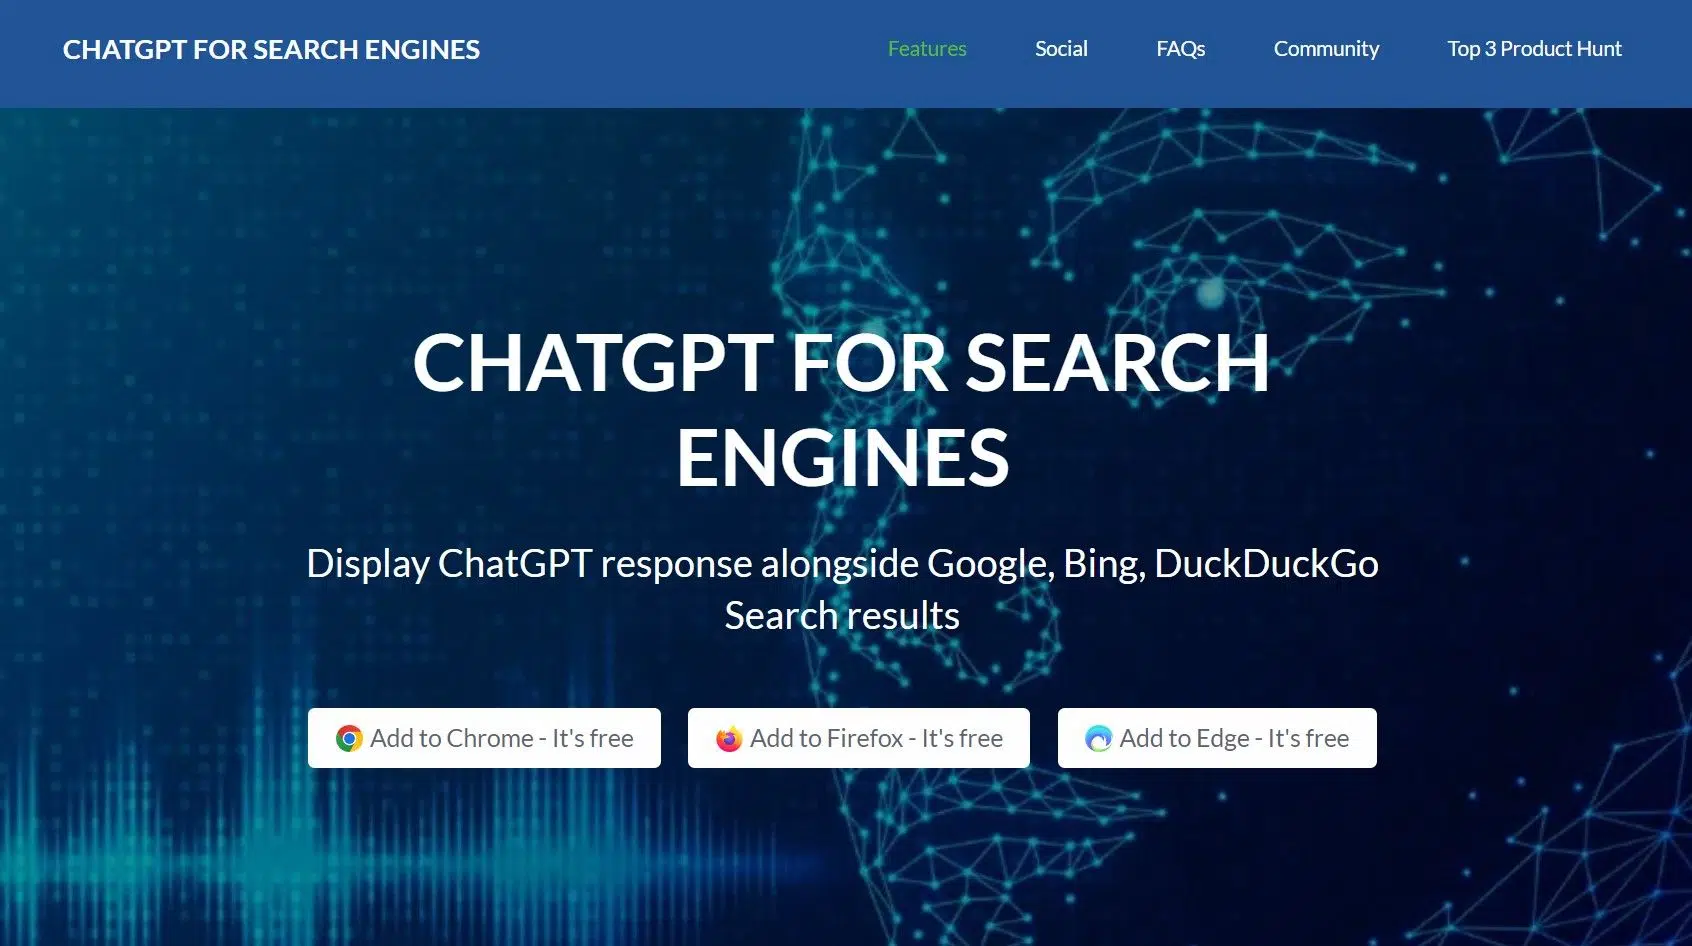 ChatGPT For Search Engineswebsite picture